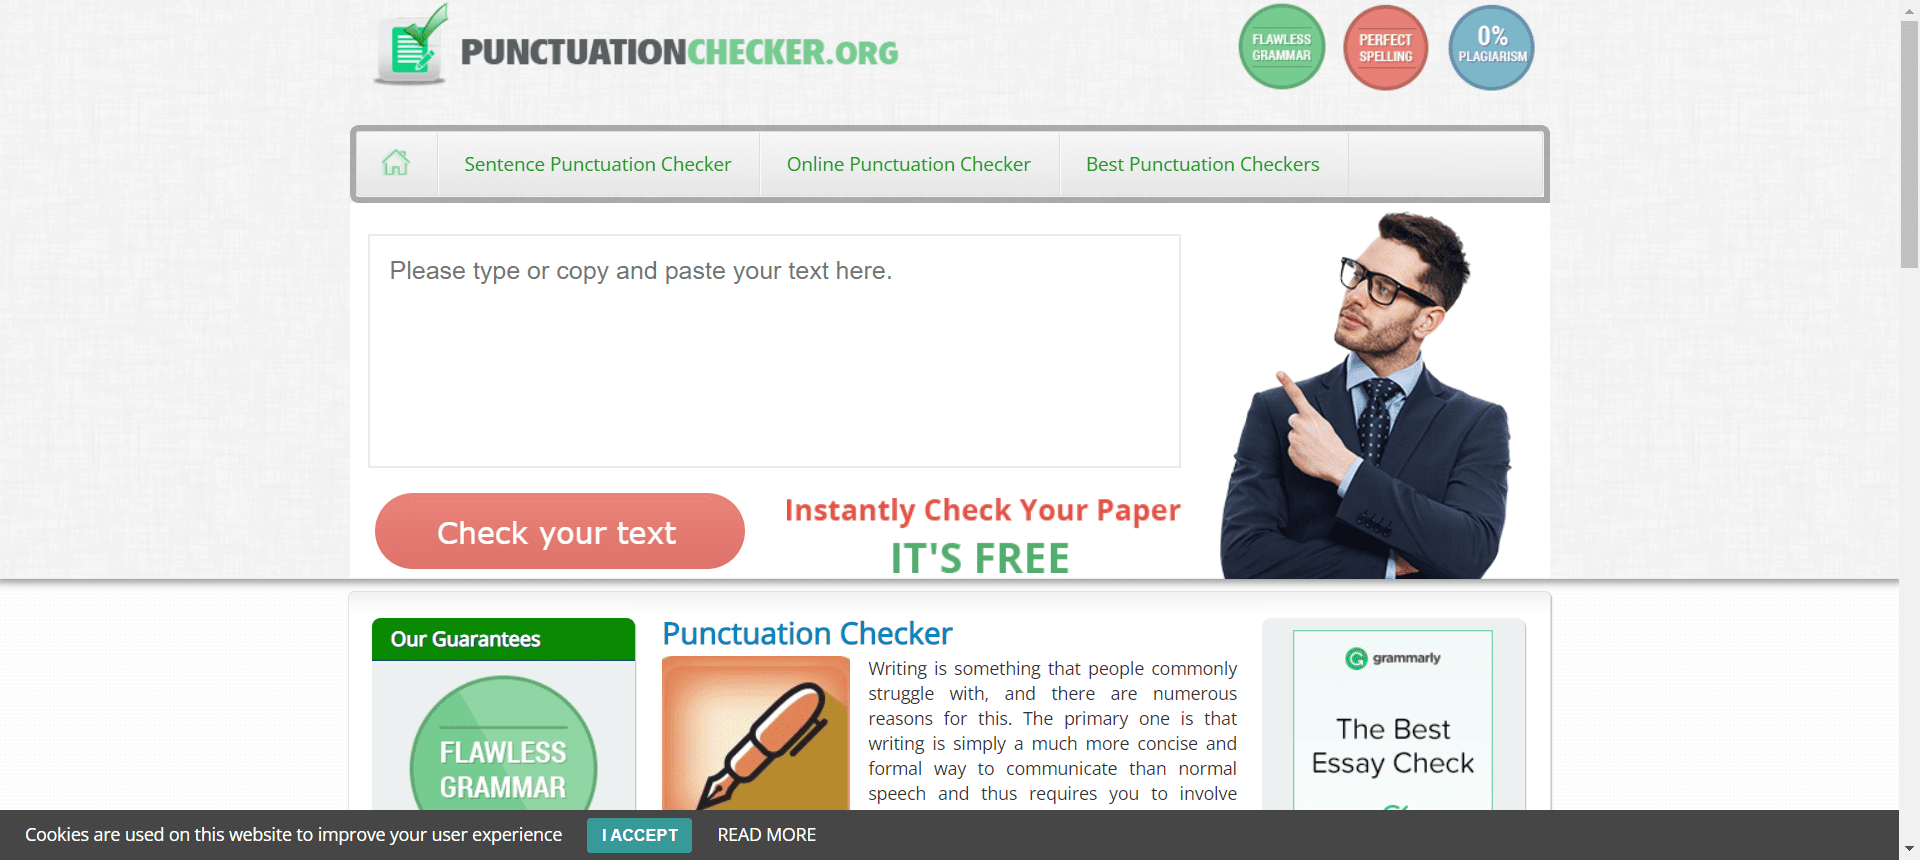 Punctuationchecker.org